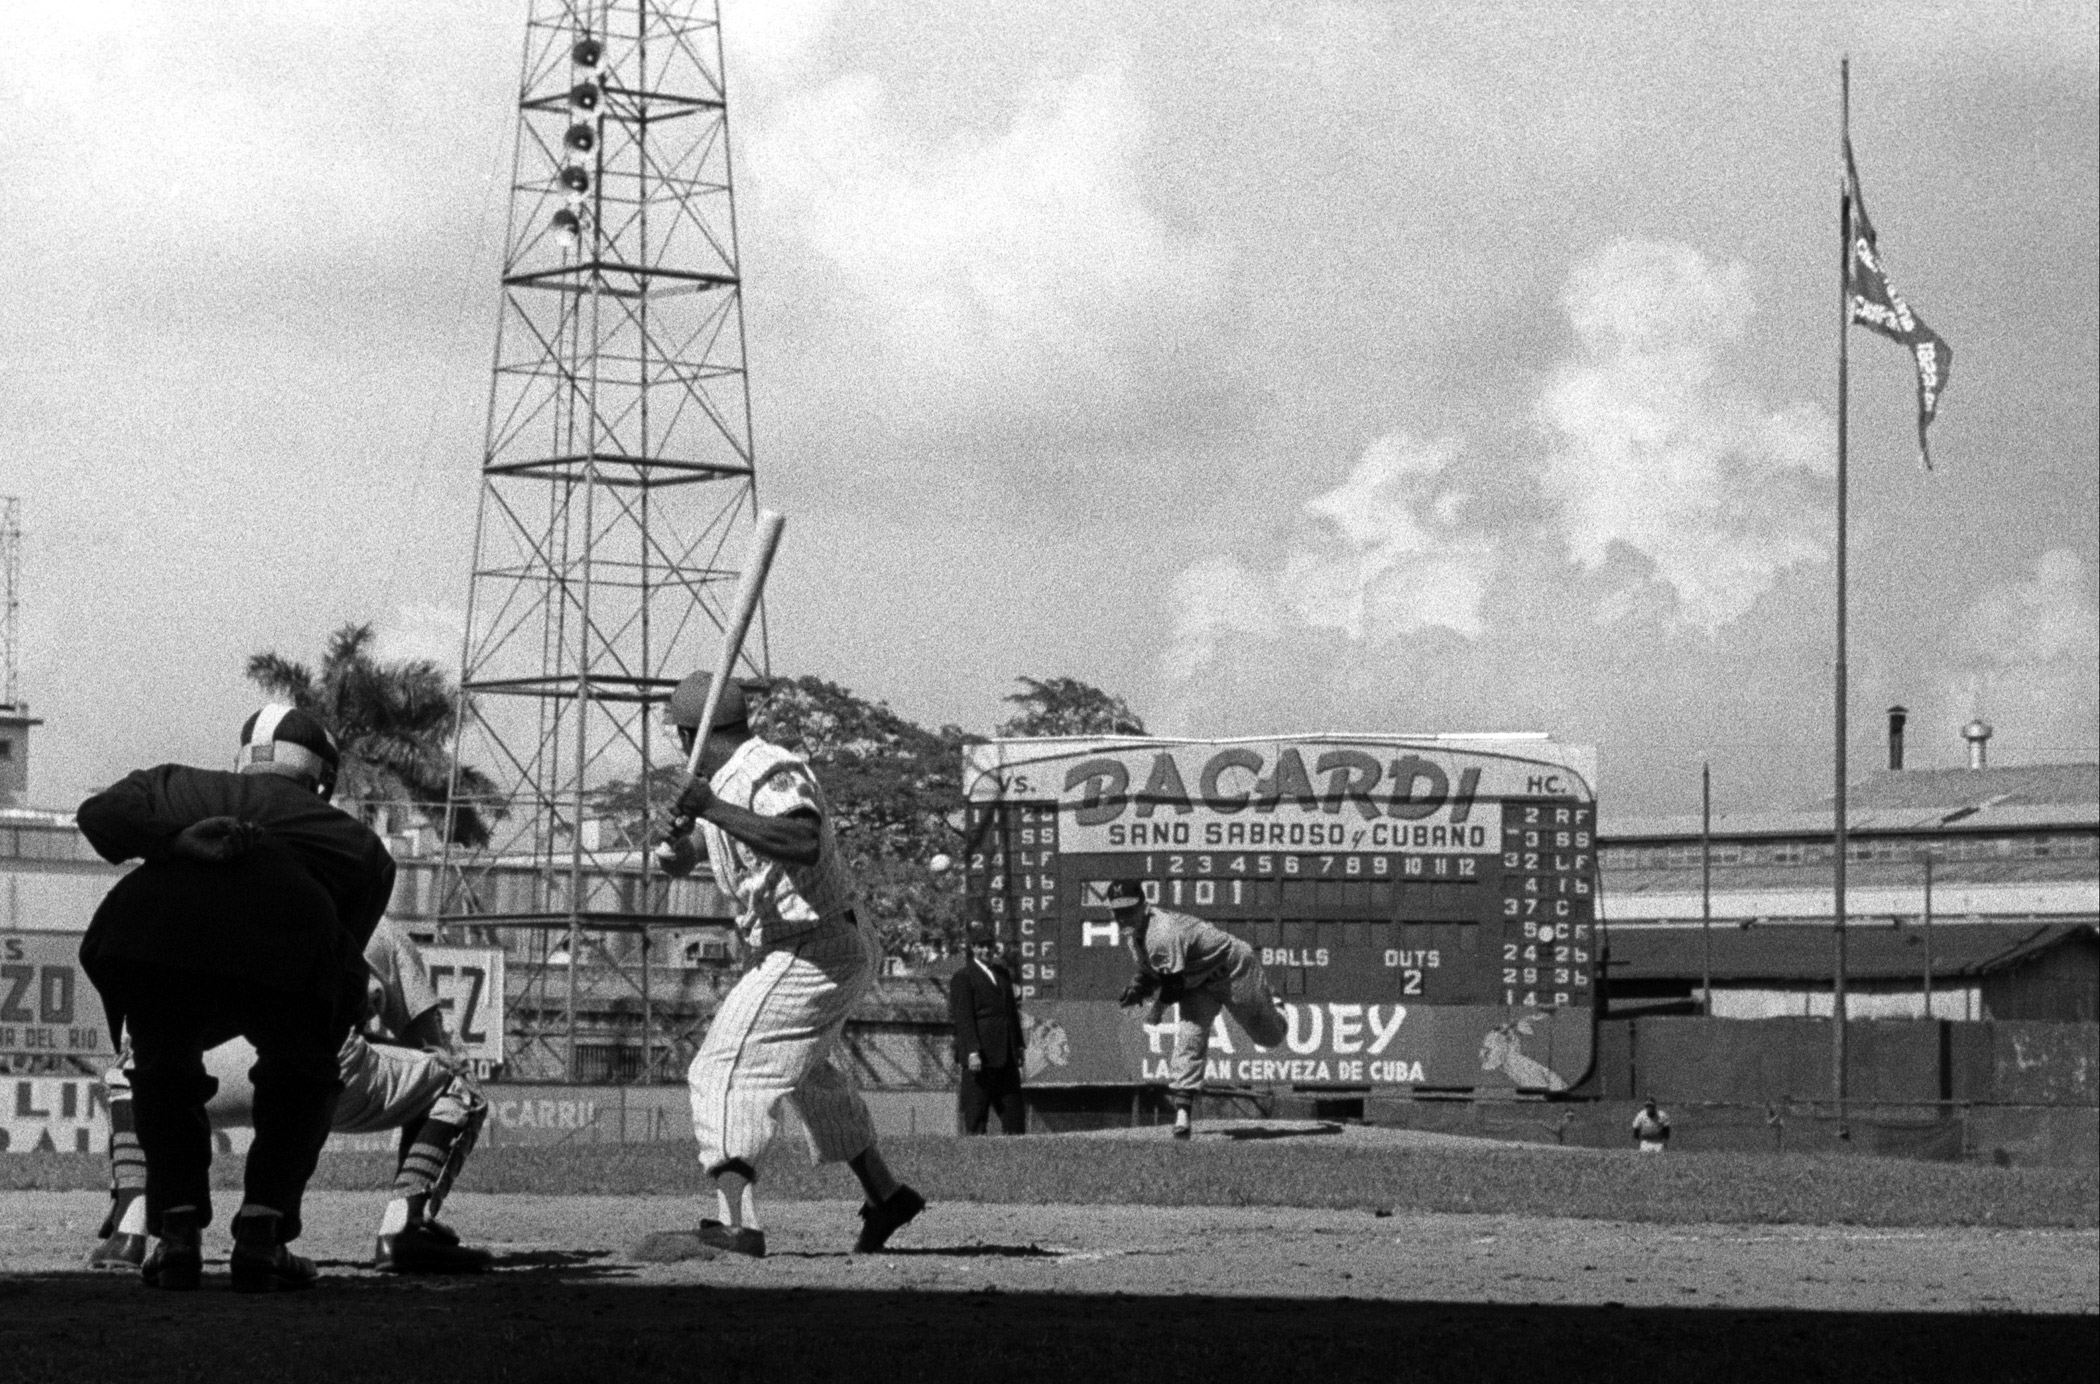 Baseball players in action during the first baseball championship in Havana in 1960.